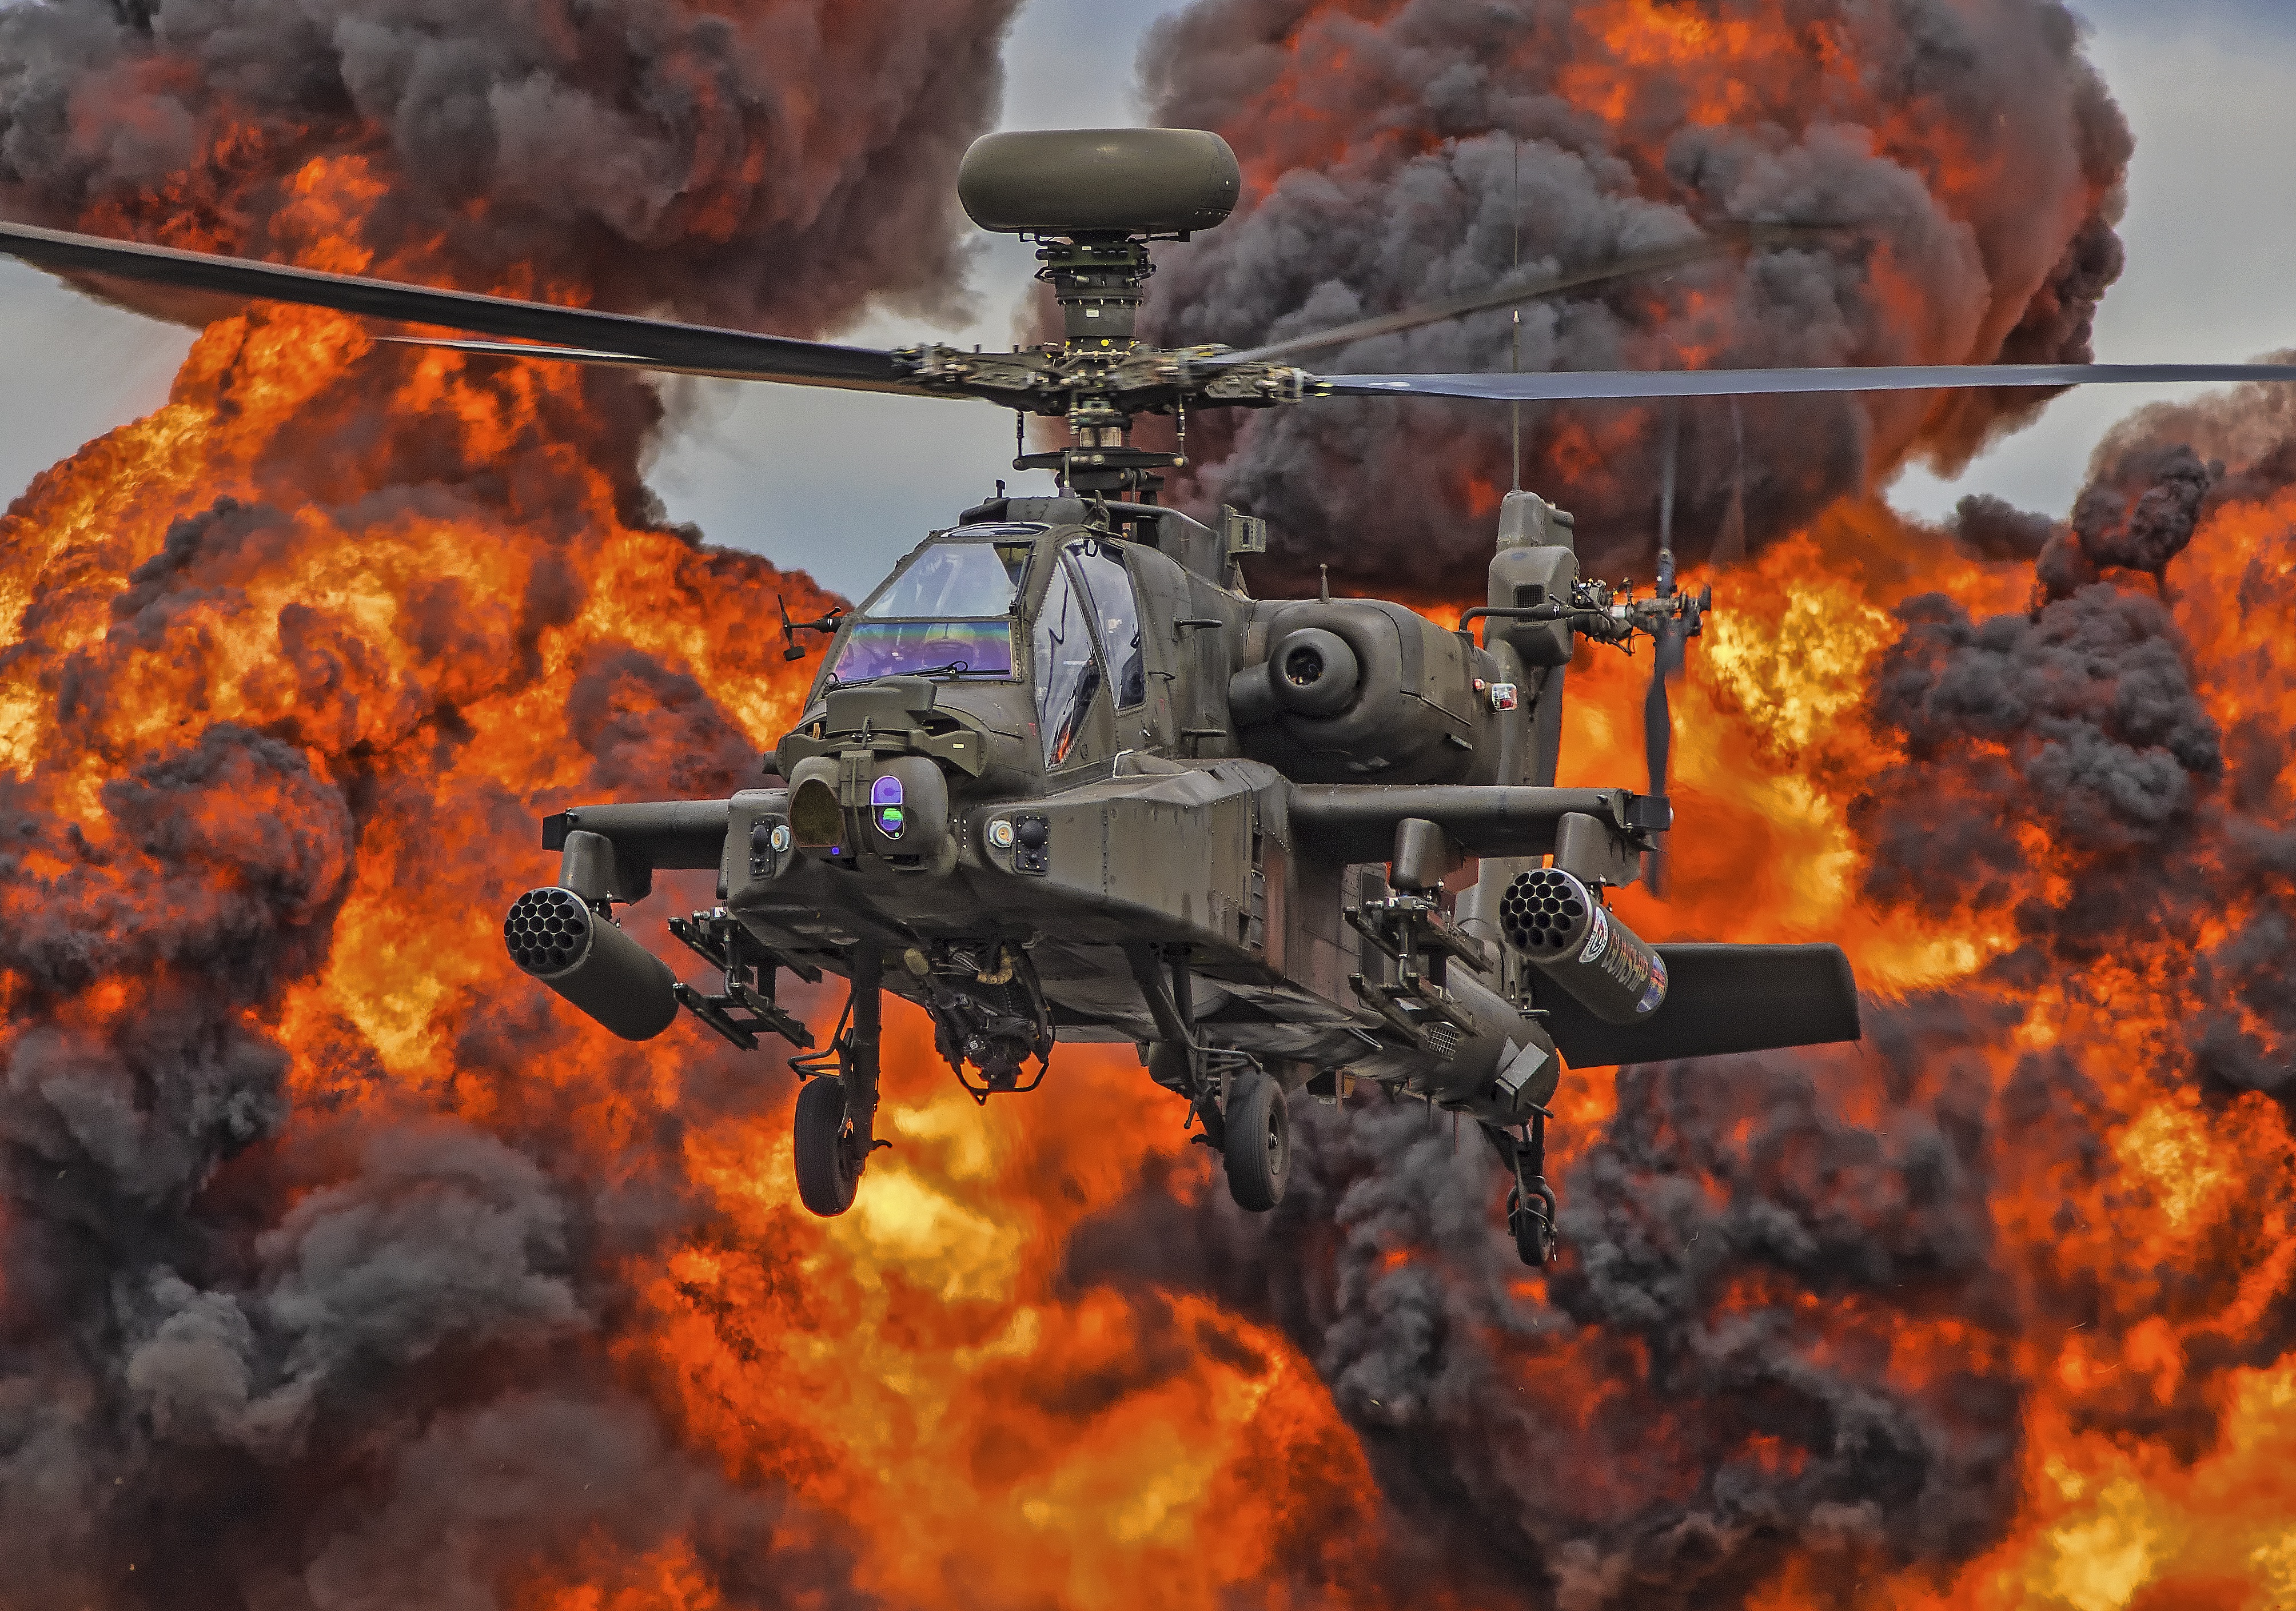 attack helicopter, military, boeing ah 64 apache, aircraft, explosion, helicopter, military helicopters